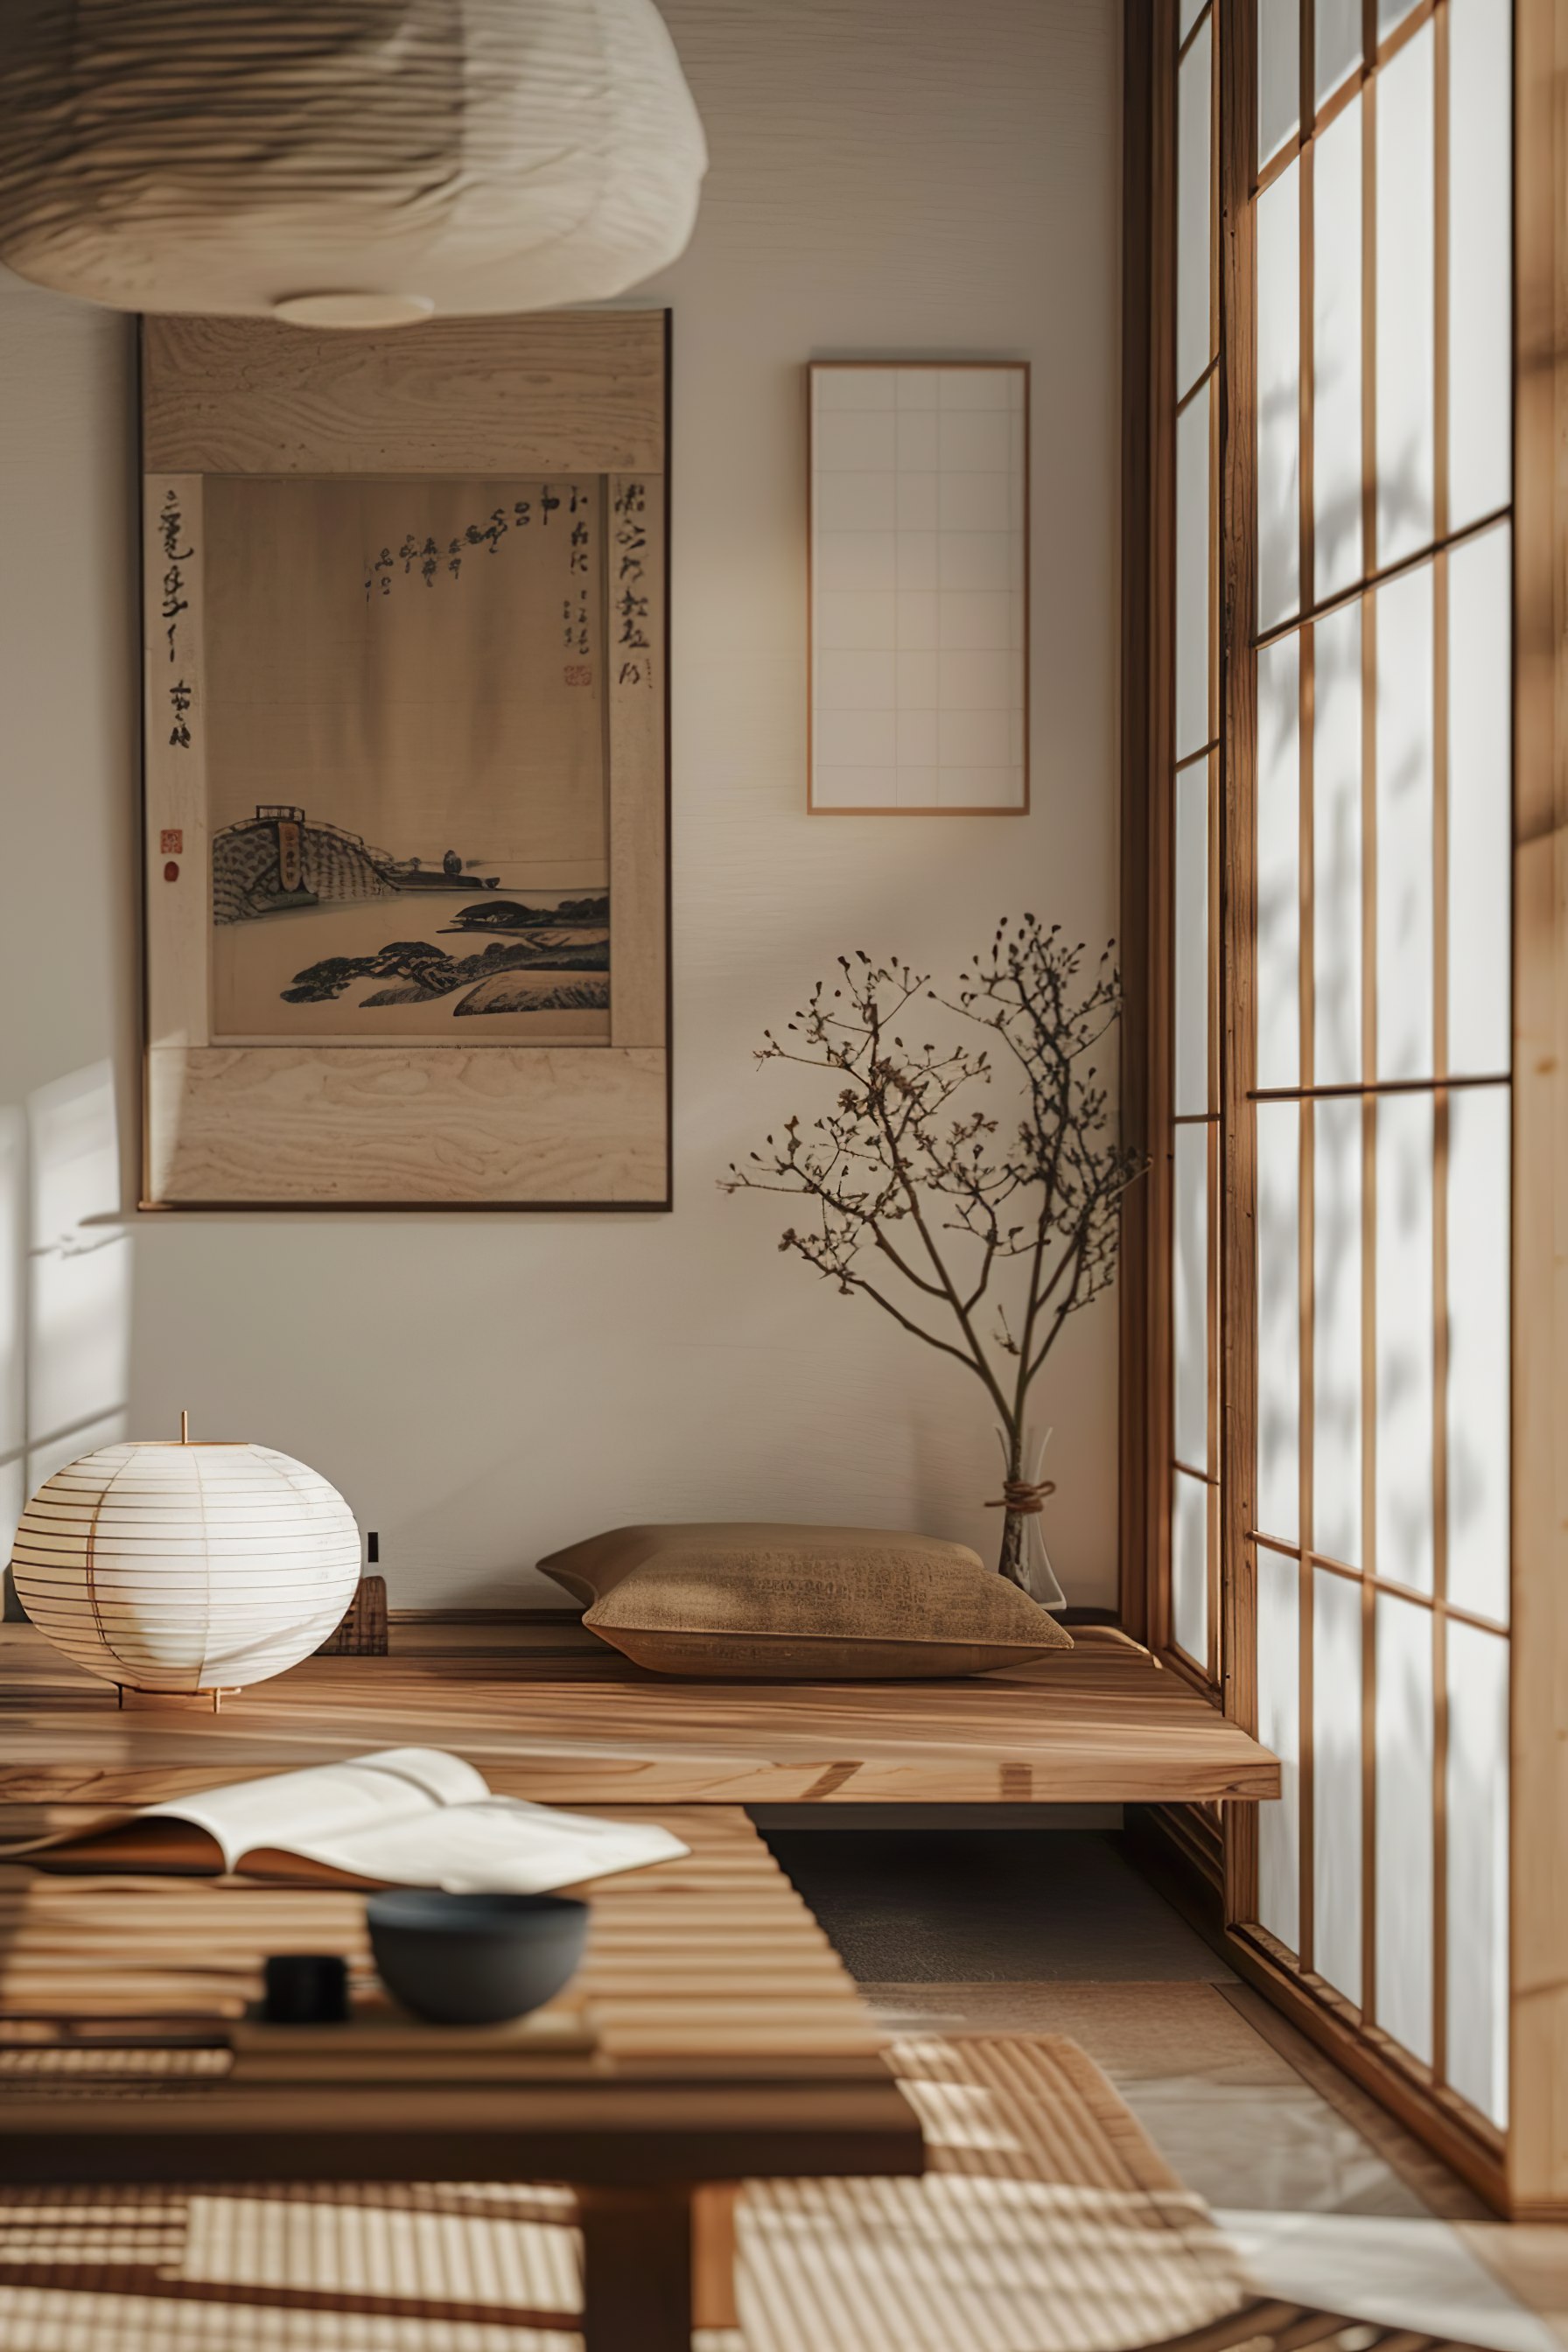 A serene Japanese-style room with tatami flooring, shoji doors, traditional artwork, a low table with a book, and a hanging paper lantern.